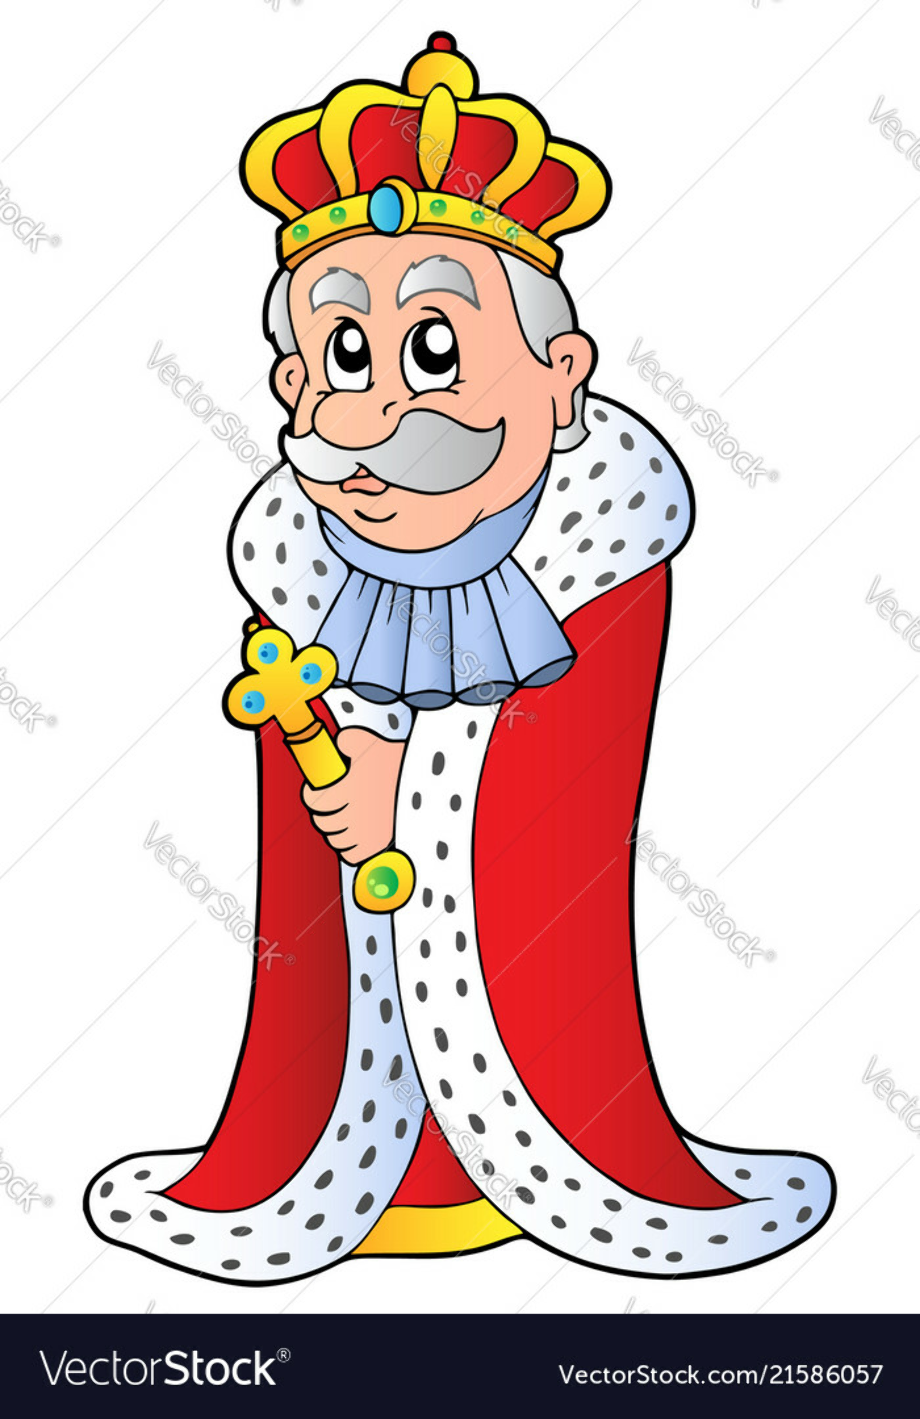 king clipart handsome